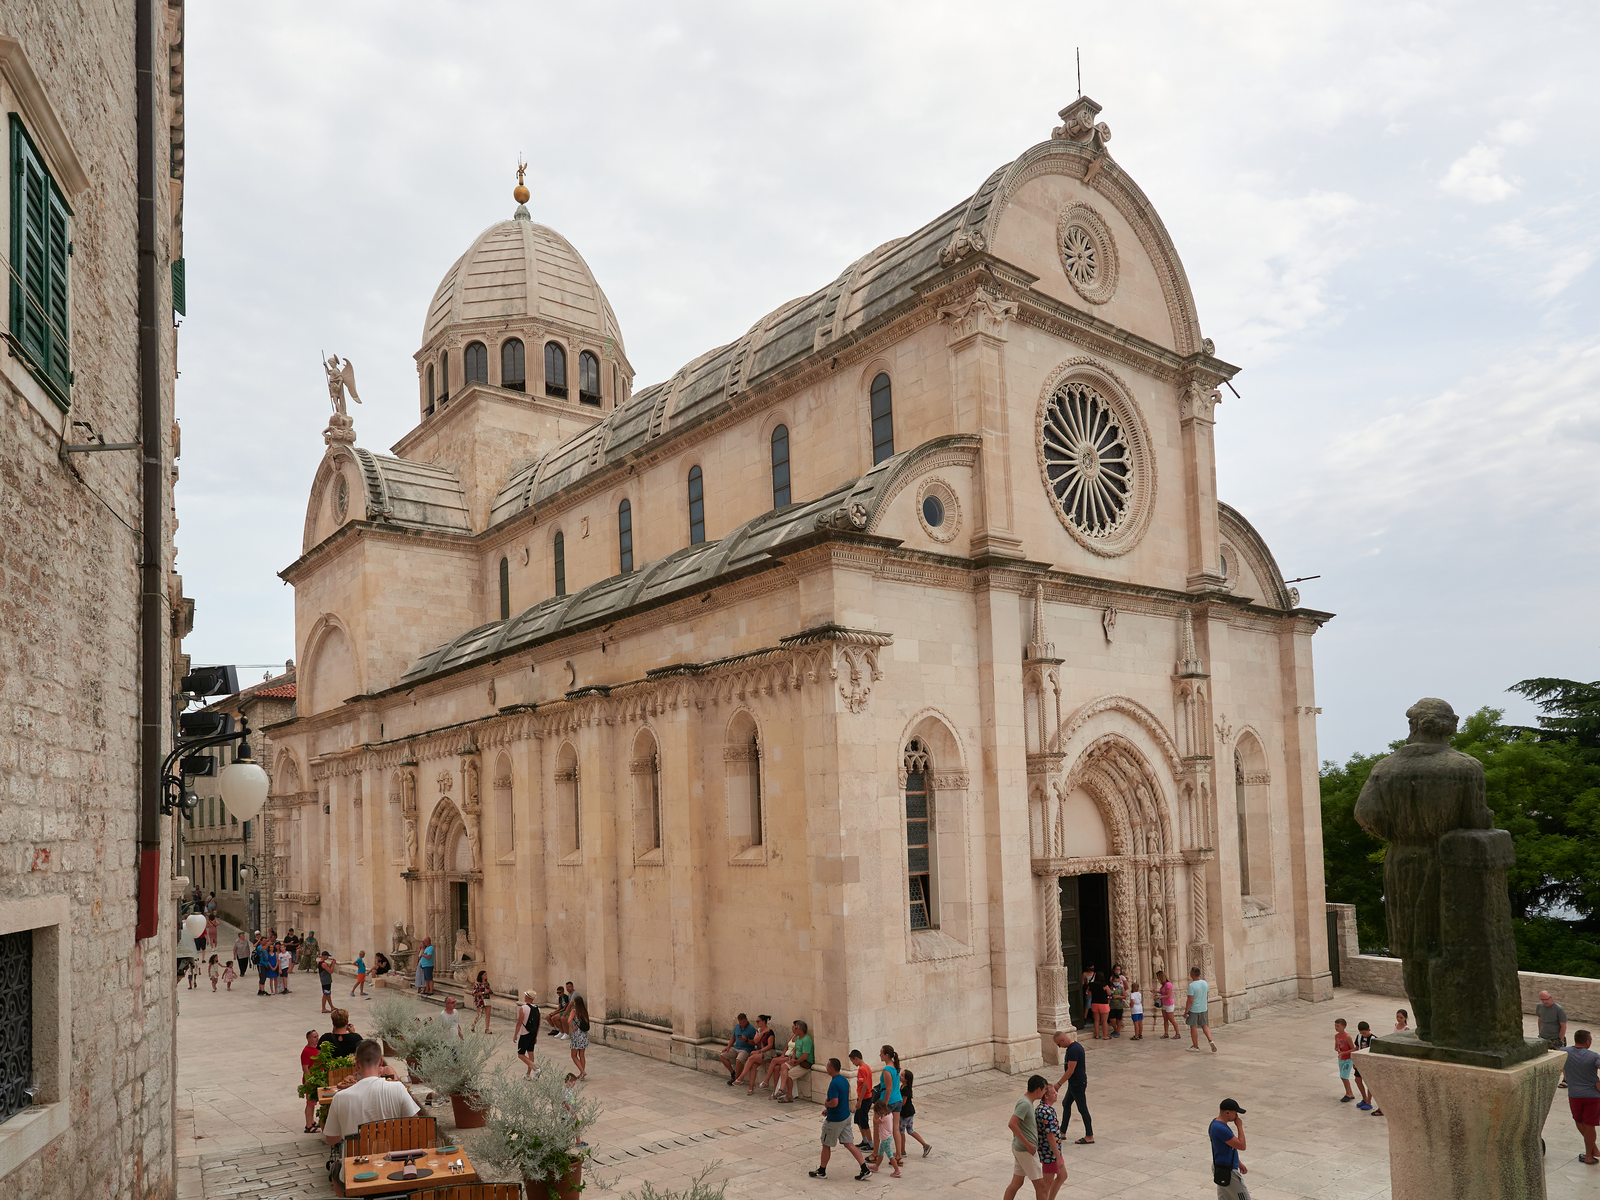 Locals strolling around near Saint James Cathedral in Šibenik, Croatia, a famous Game of Thrones filming locations you can visit